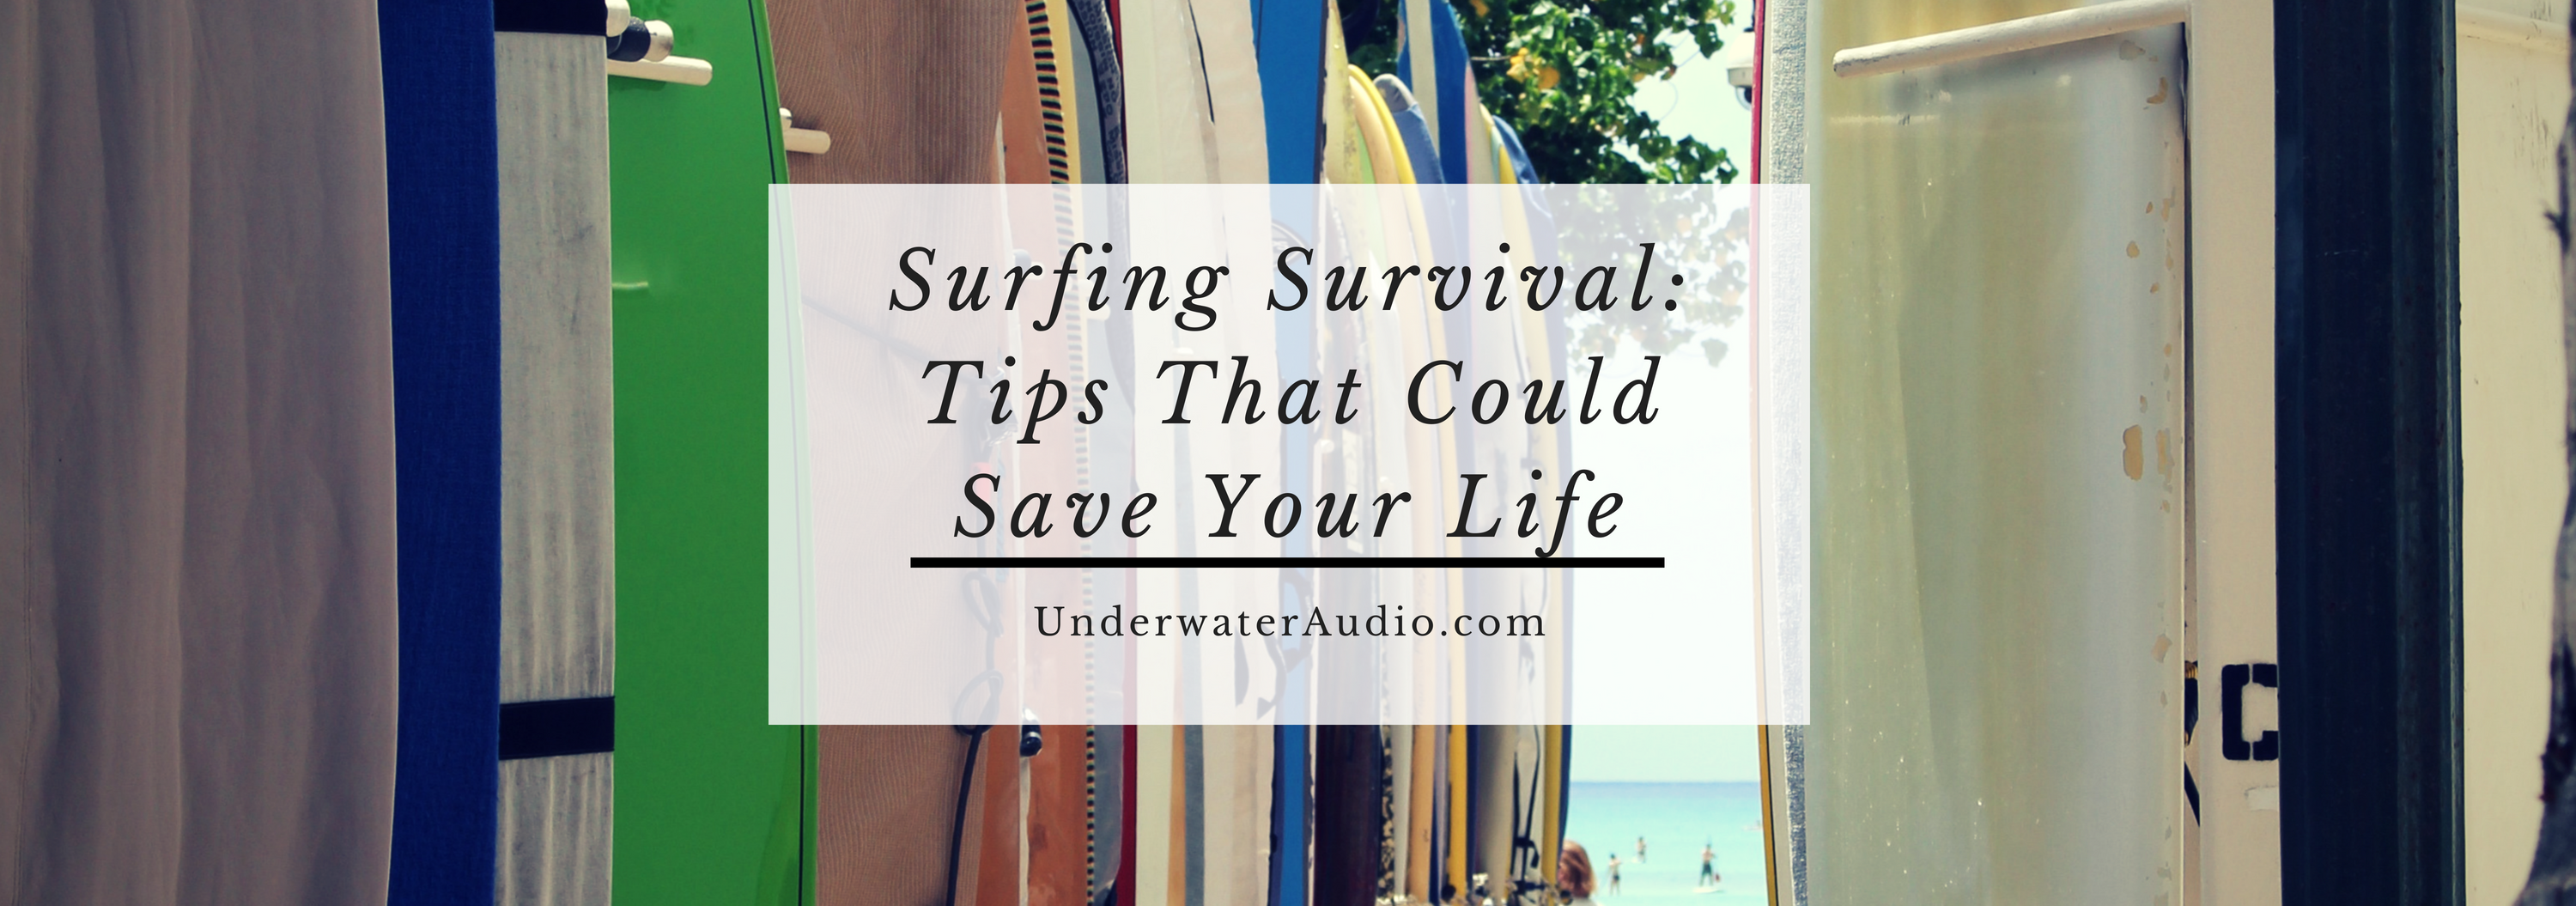 Surfing Survival: Tips That Could Save Your Life